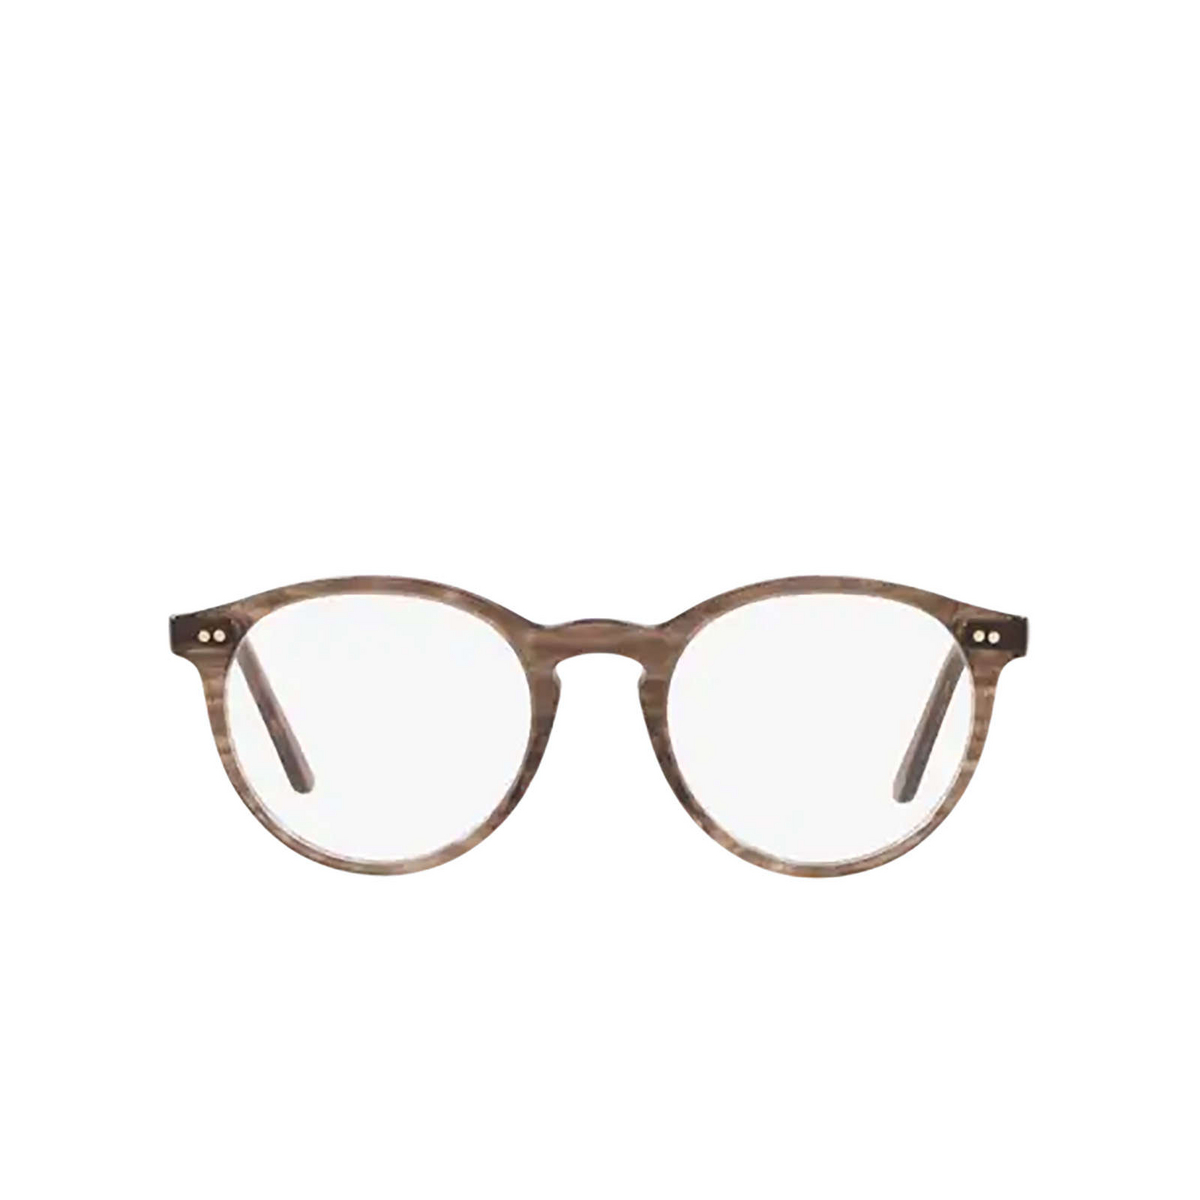 Polo Ralph Lauren® Round Eyeglasses: PH2083 color Shiny Striped Brown 5822 - front view.